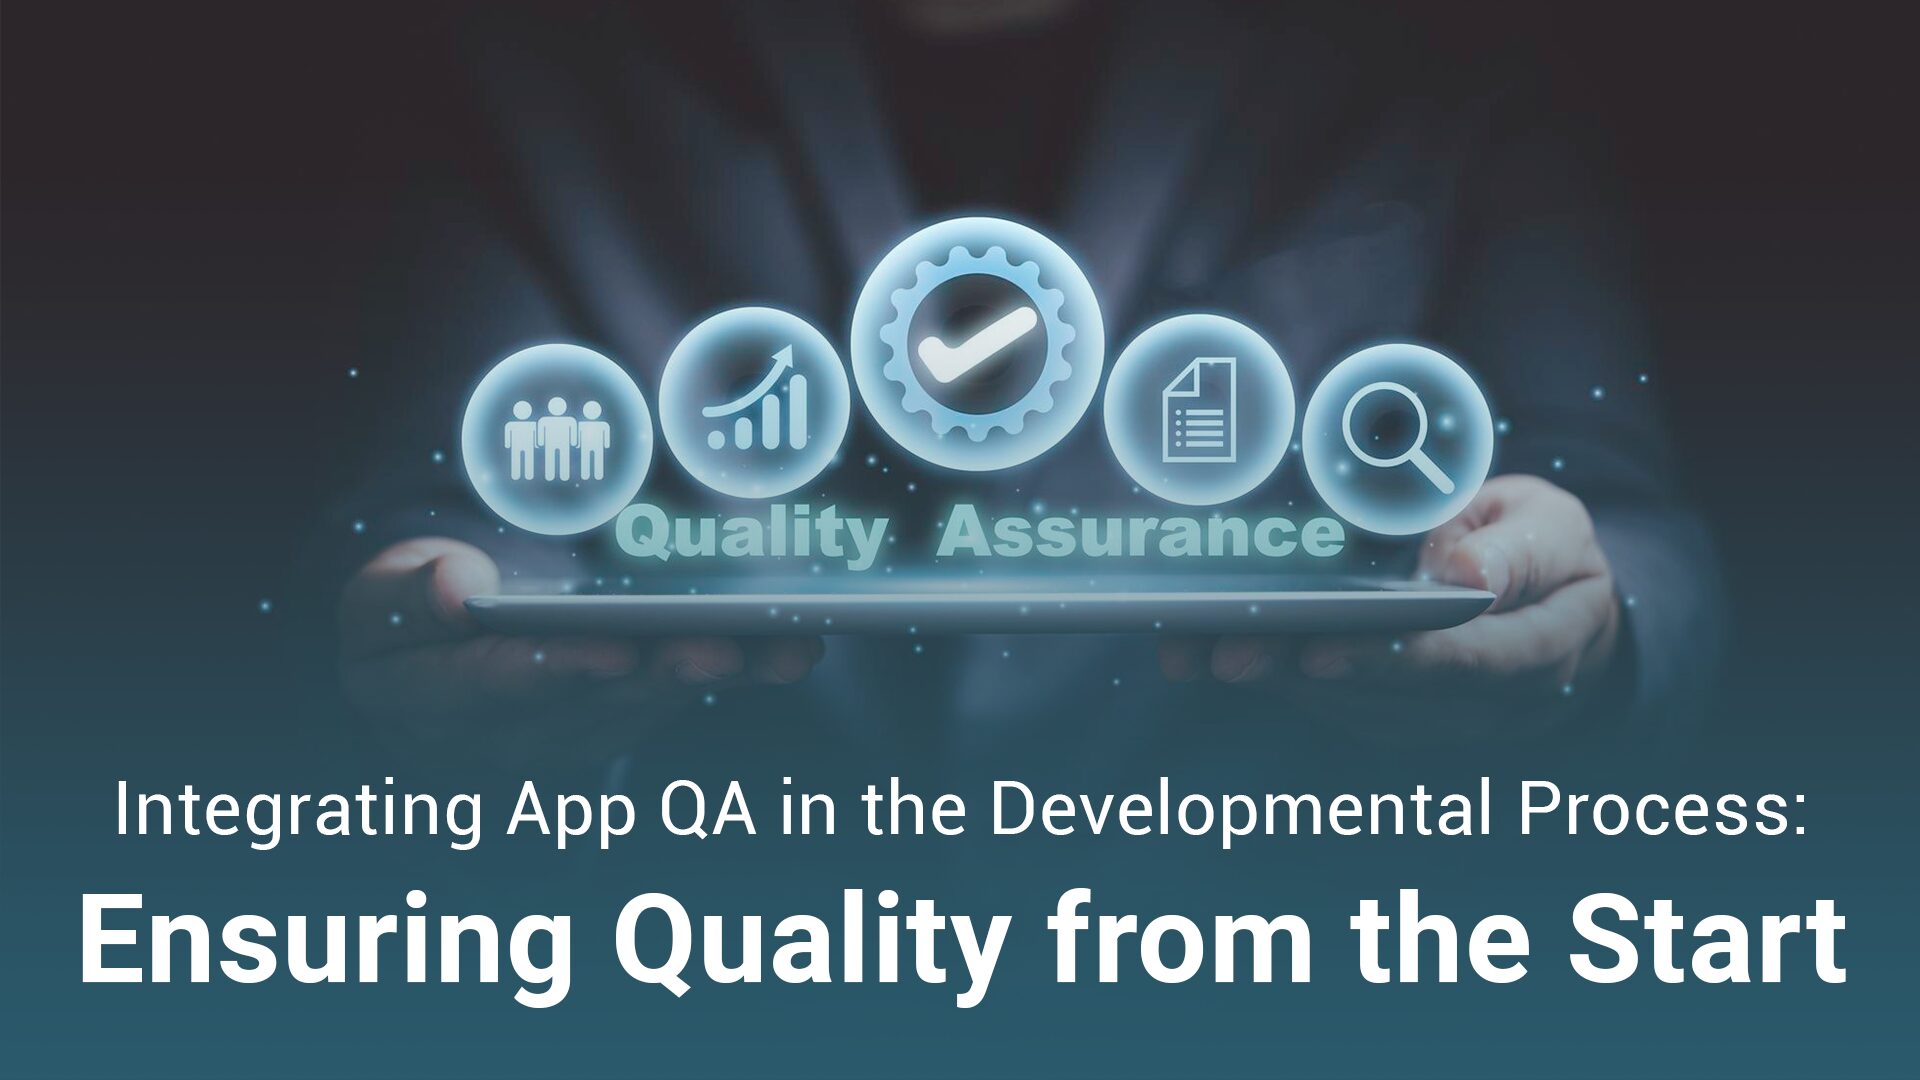 Integrating App QA in the Developmental Process: Ensuring Quality from the Start